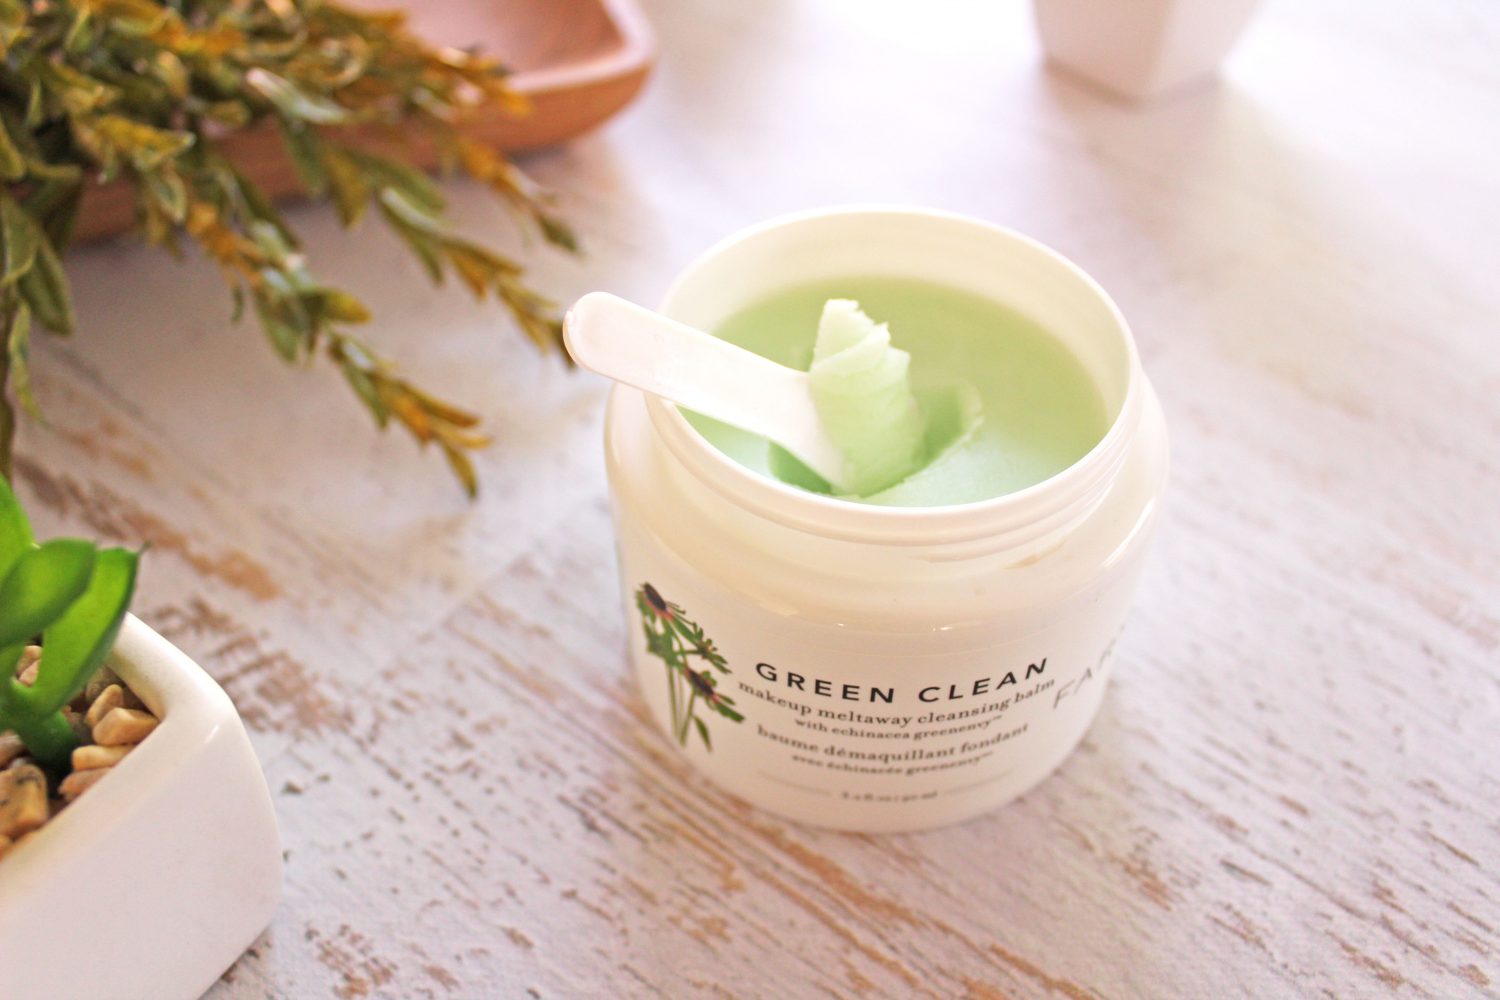 farmacy green clean makeup meltaway cleansing balm review by iliketotalkblog